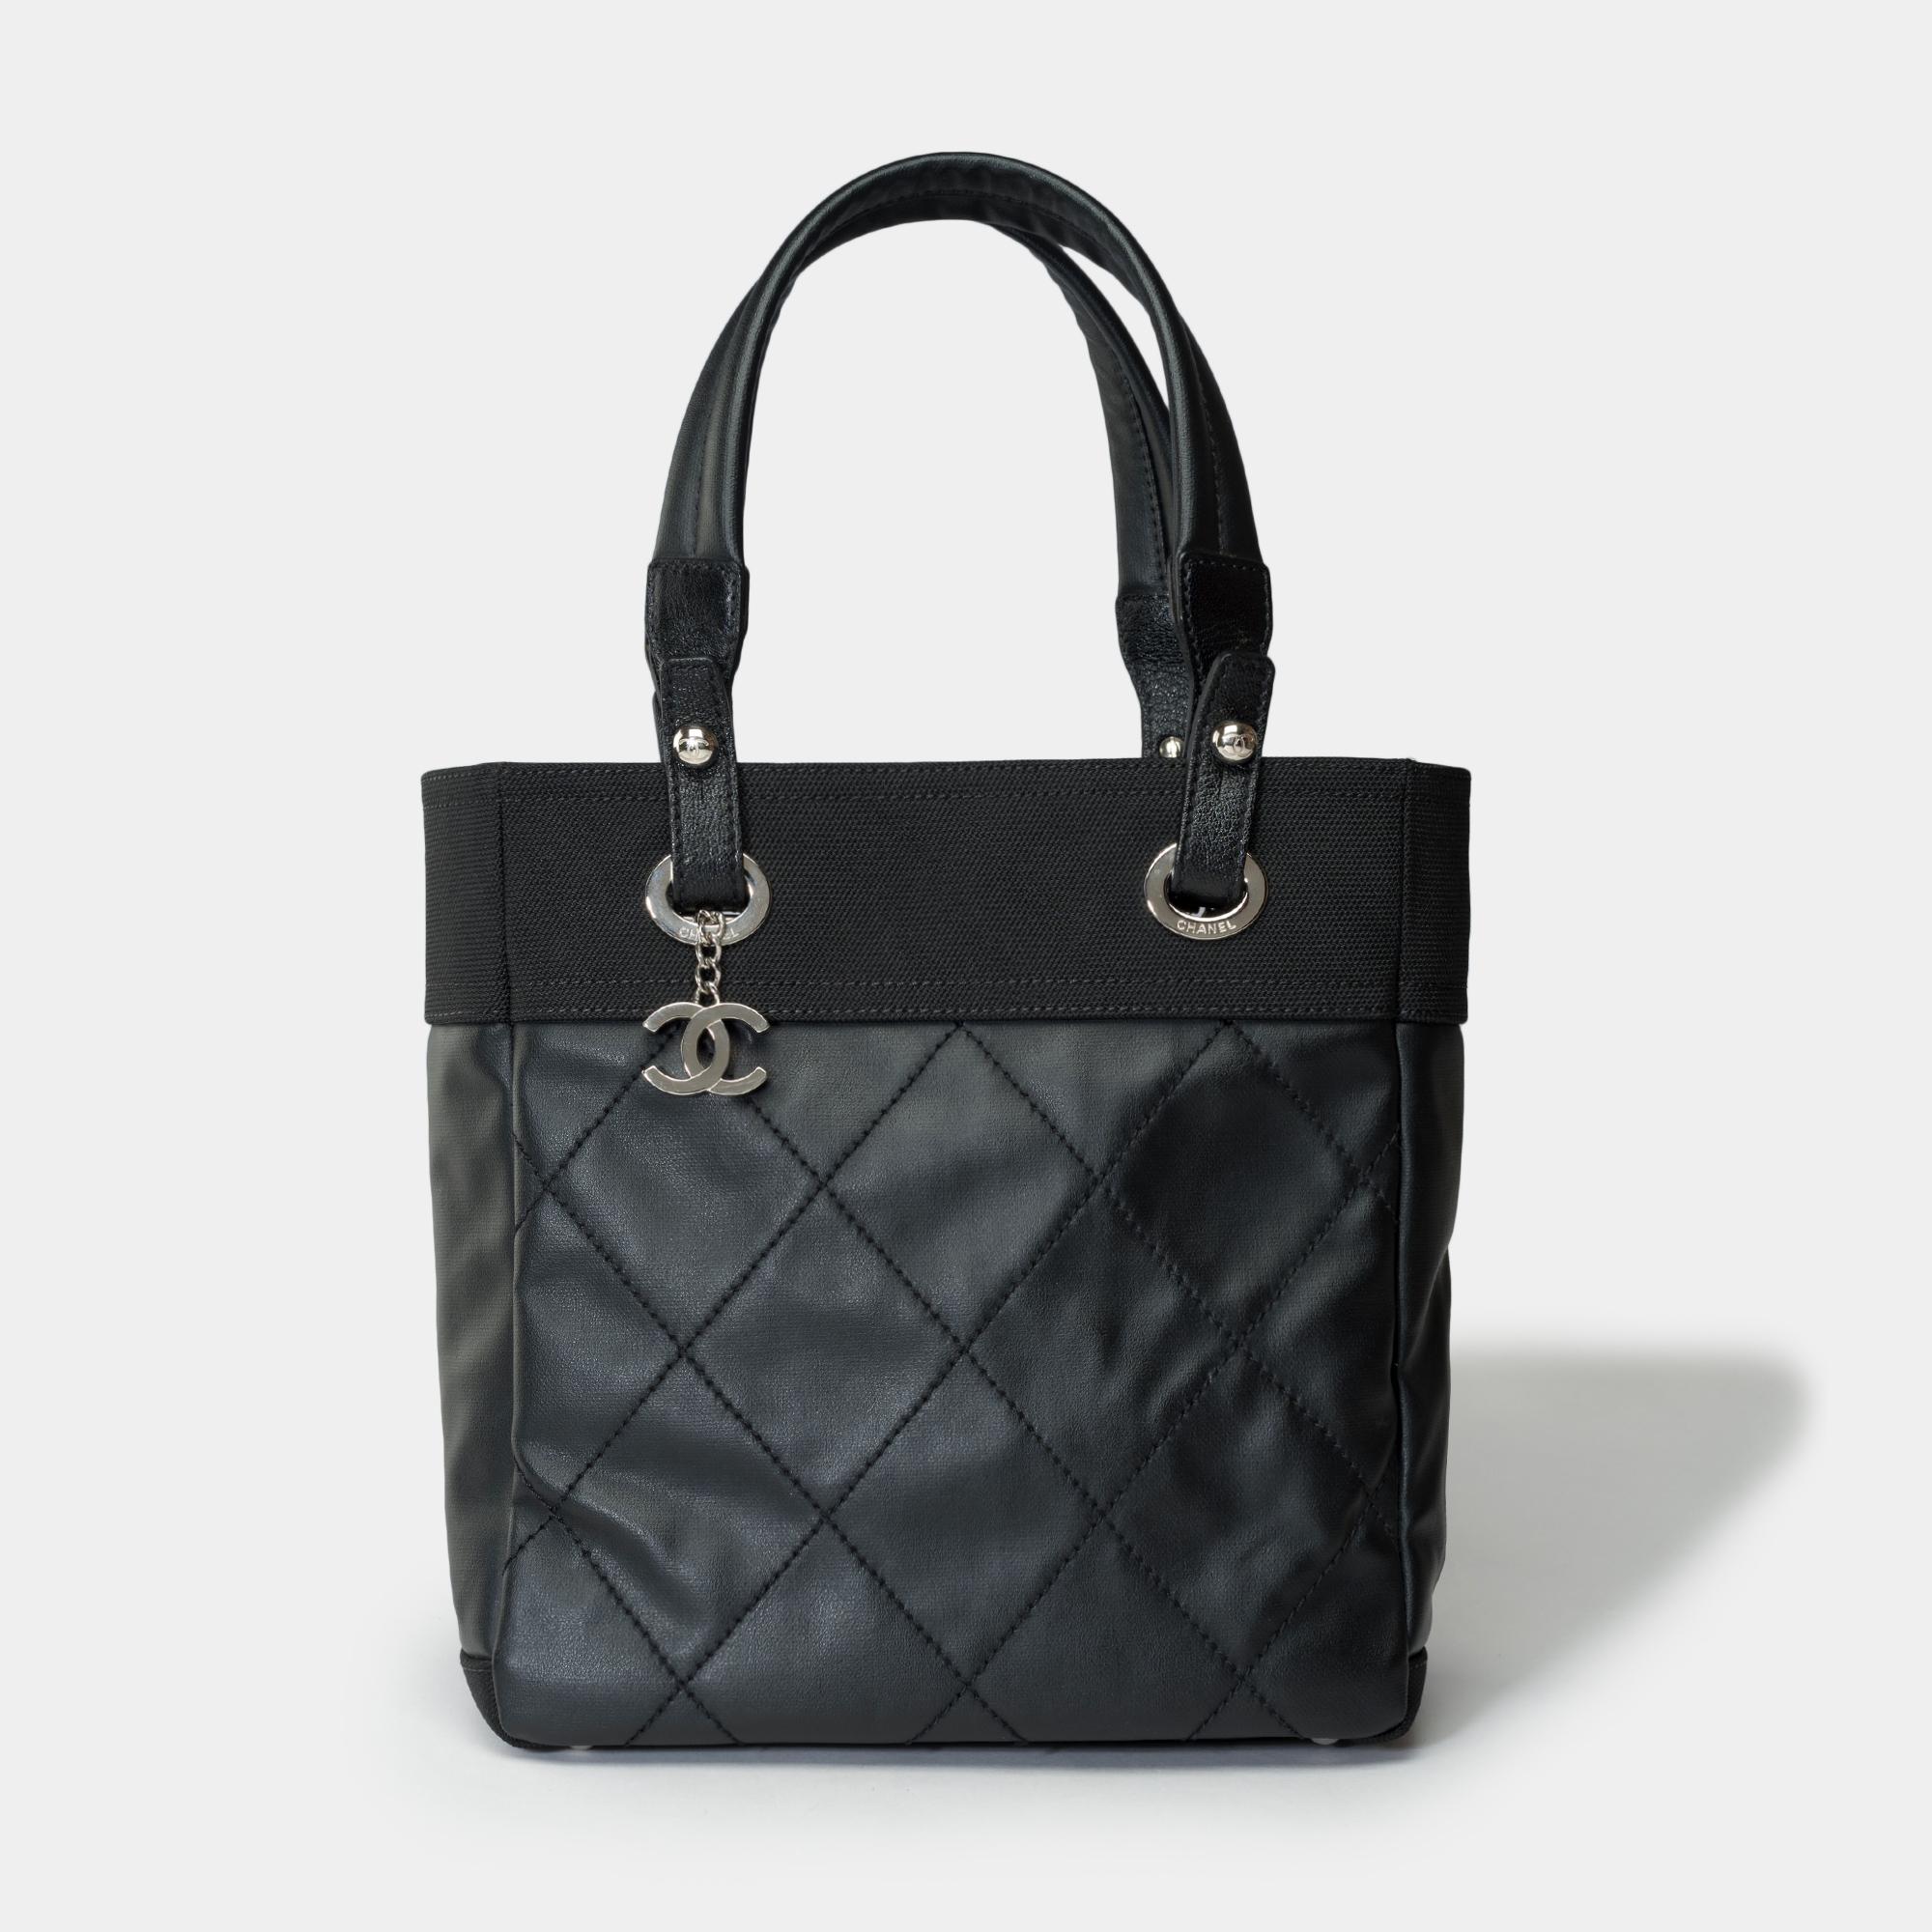 Elegant​ ​Chanel​ ​Paris-Biarritz​ ​Tote​ ​bag​ ​in​ ​black​ ​coated​ ​canvas​ ​and​ ​black​ ​canvas,​ ​silver​ ​metal​ ​trim,​ ​double​ ​black​ ​canvas​ ​handle​ ​for​ ​a​ ​hand​ ​or​ ​shoulder​ ​carry

A​ ​zipper
Inner​ ​lining​ ​in​ ​black​